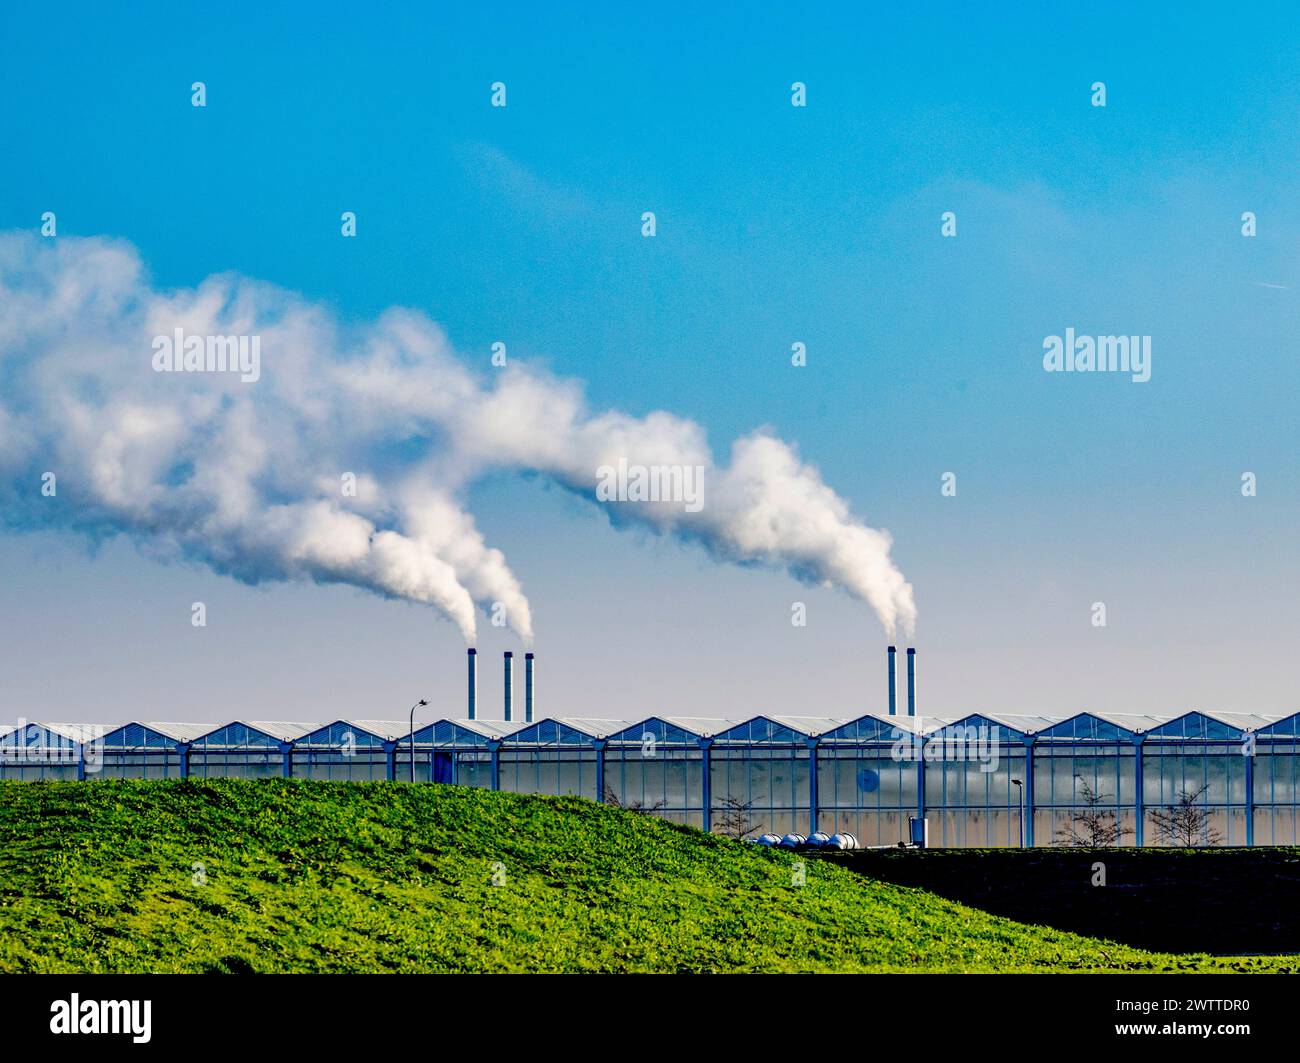 Industrial smokestacks tower over a greenhouse complex under a clear blue sky. Stock Photo